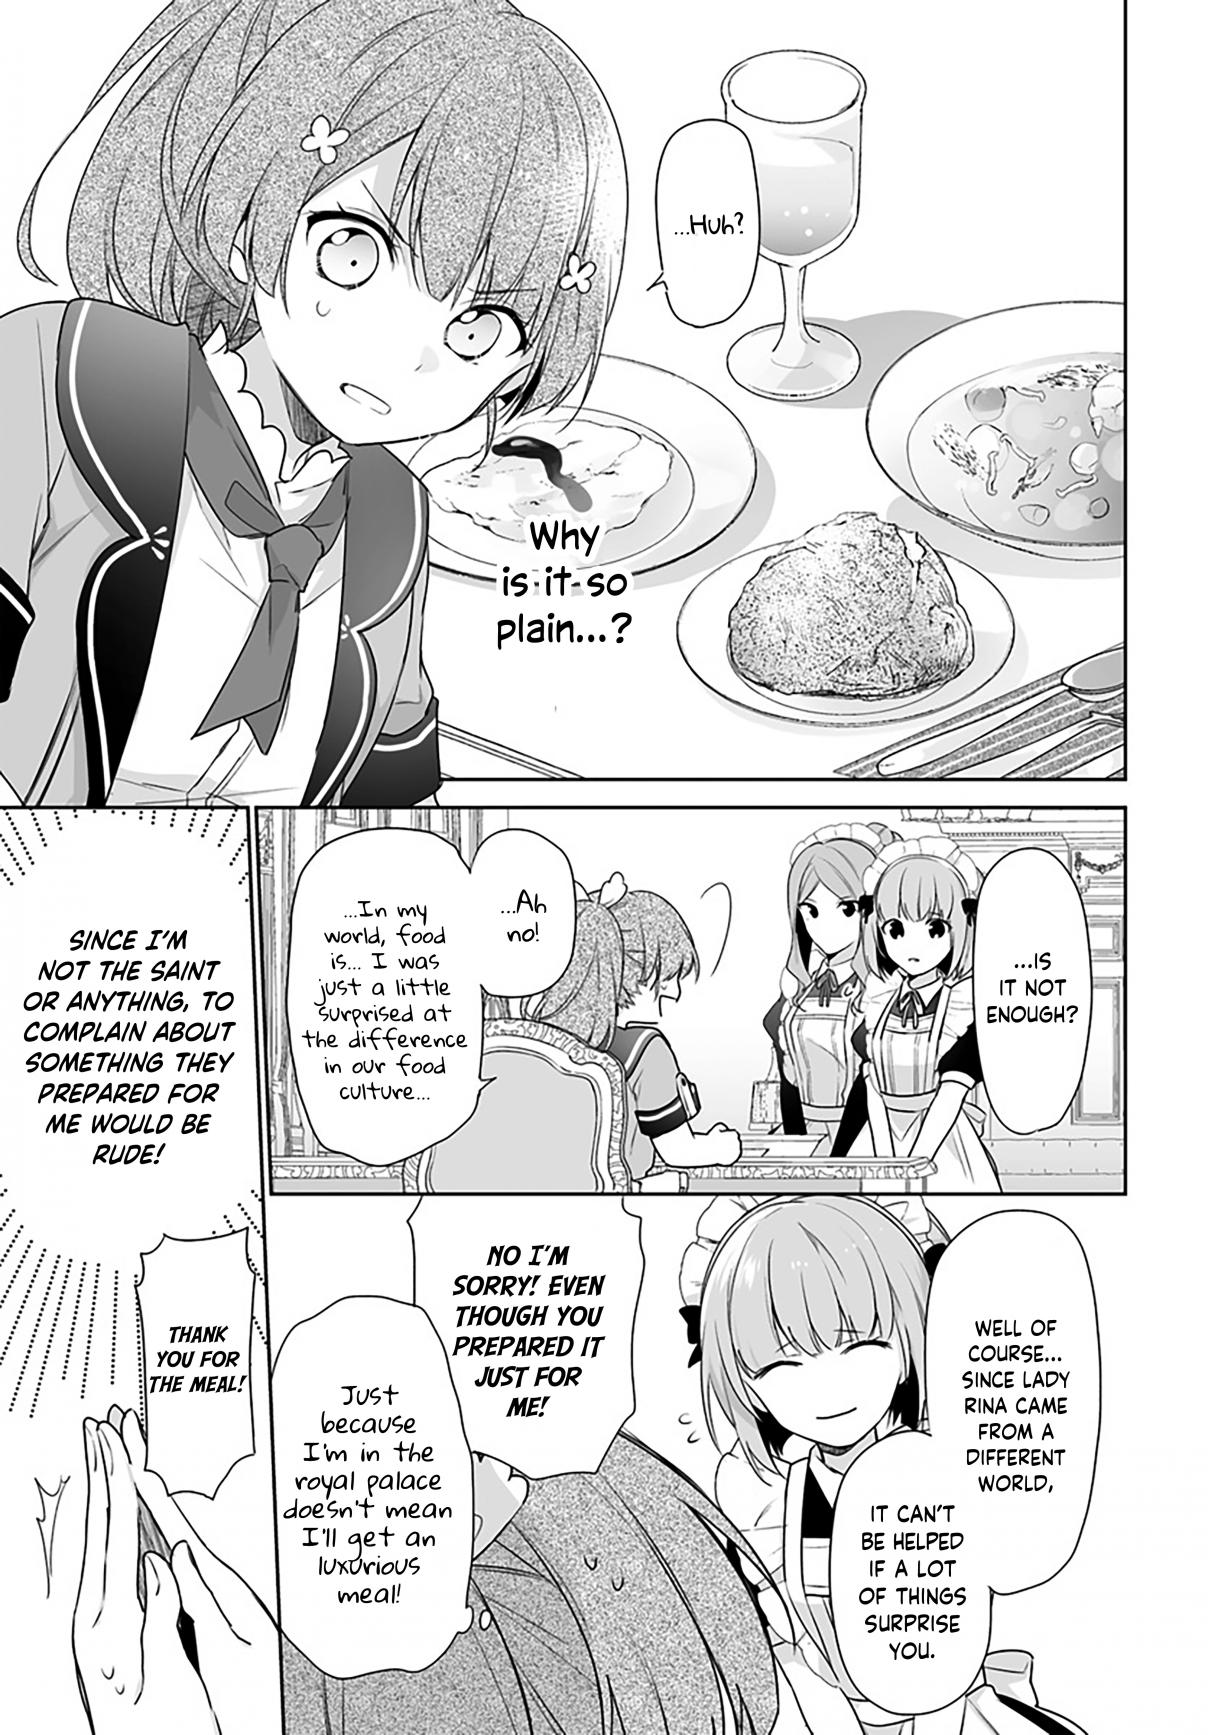 I'm Not the Saint, so I'll Just Leisurely Make Food at the Royal Palace Ch. 1.2